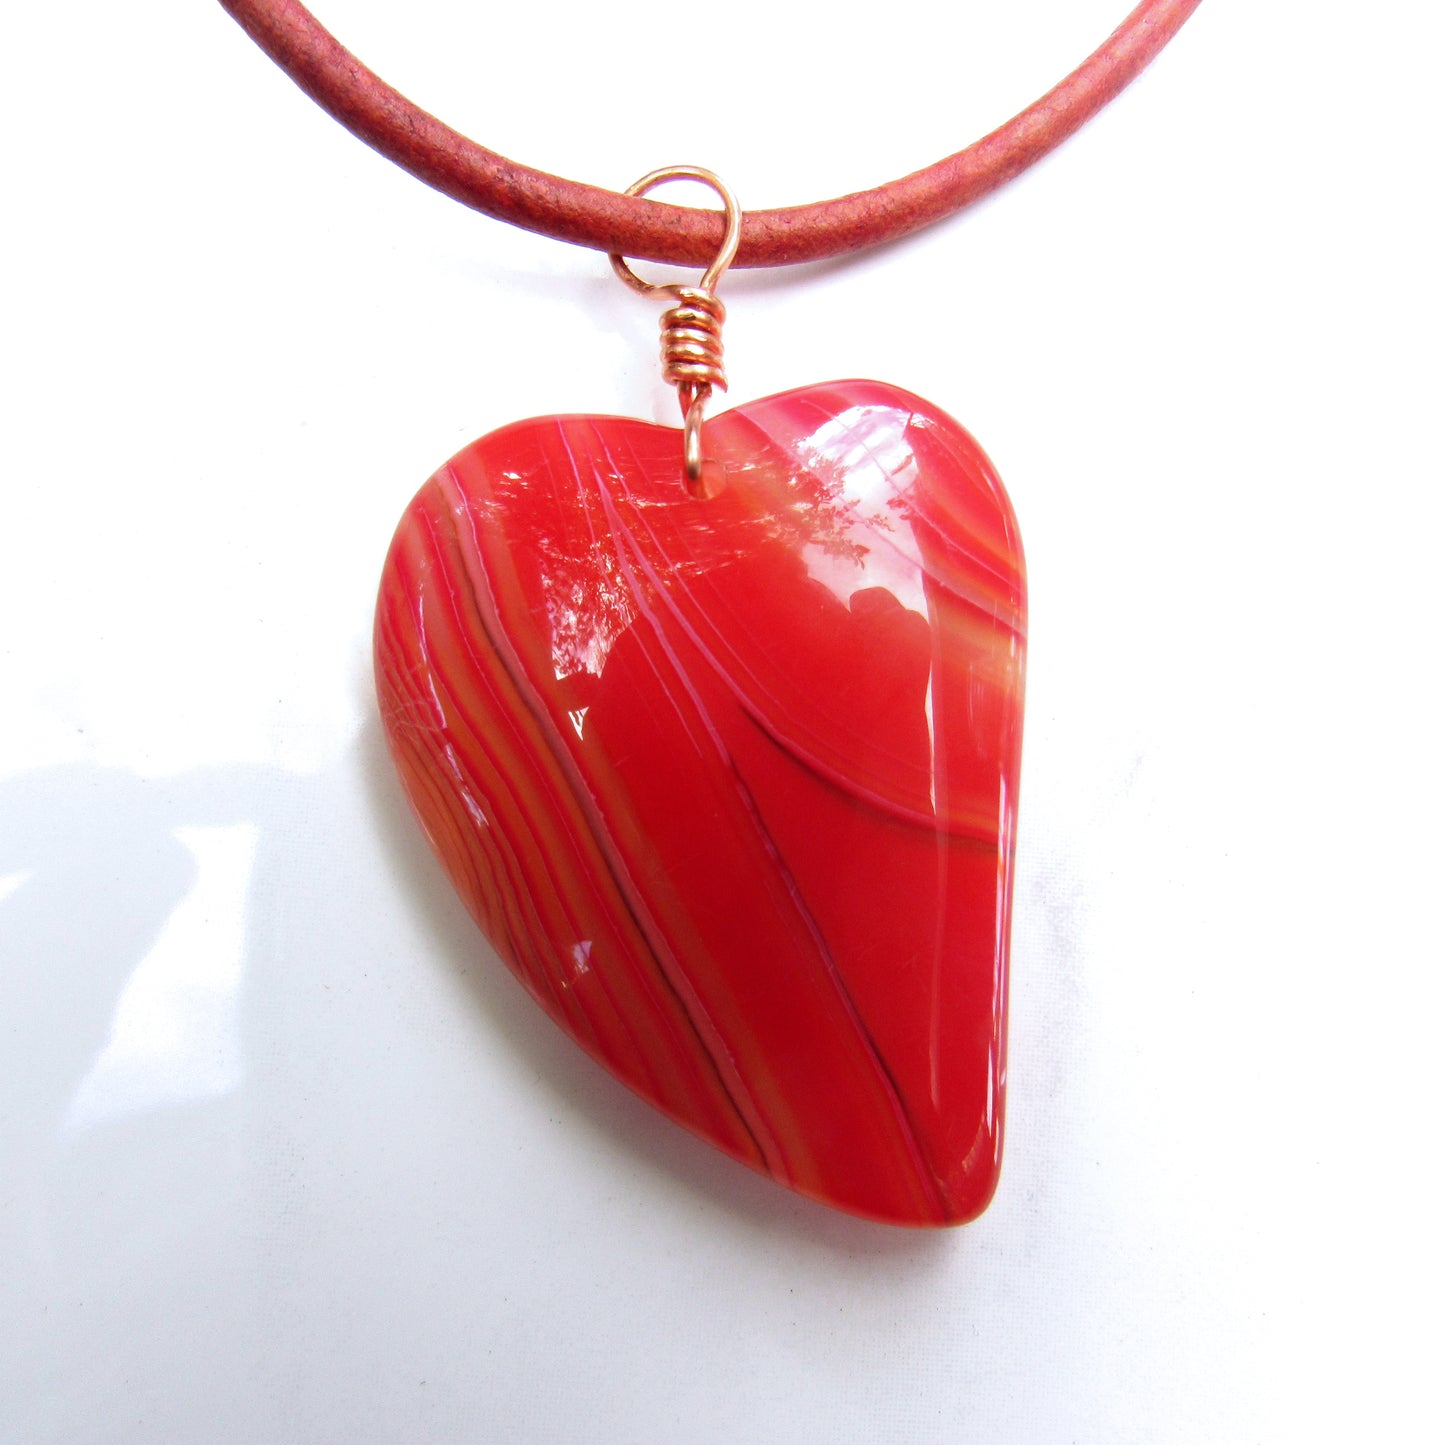 Red Banded Agate gemstone on Leather Necklace